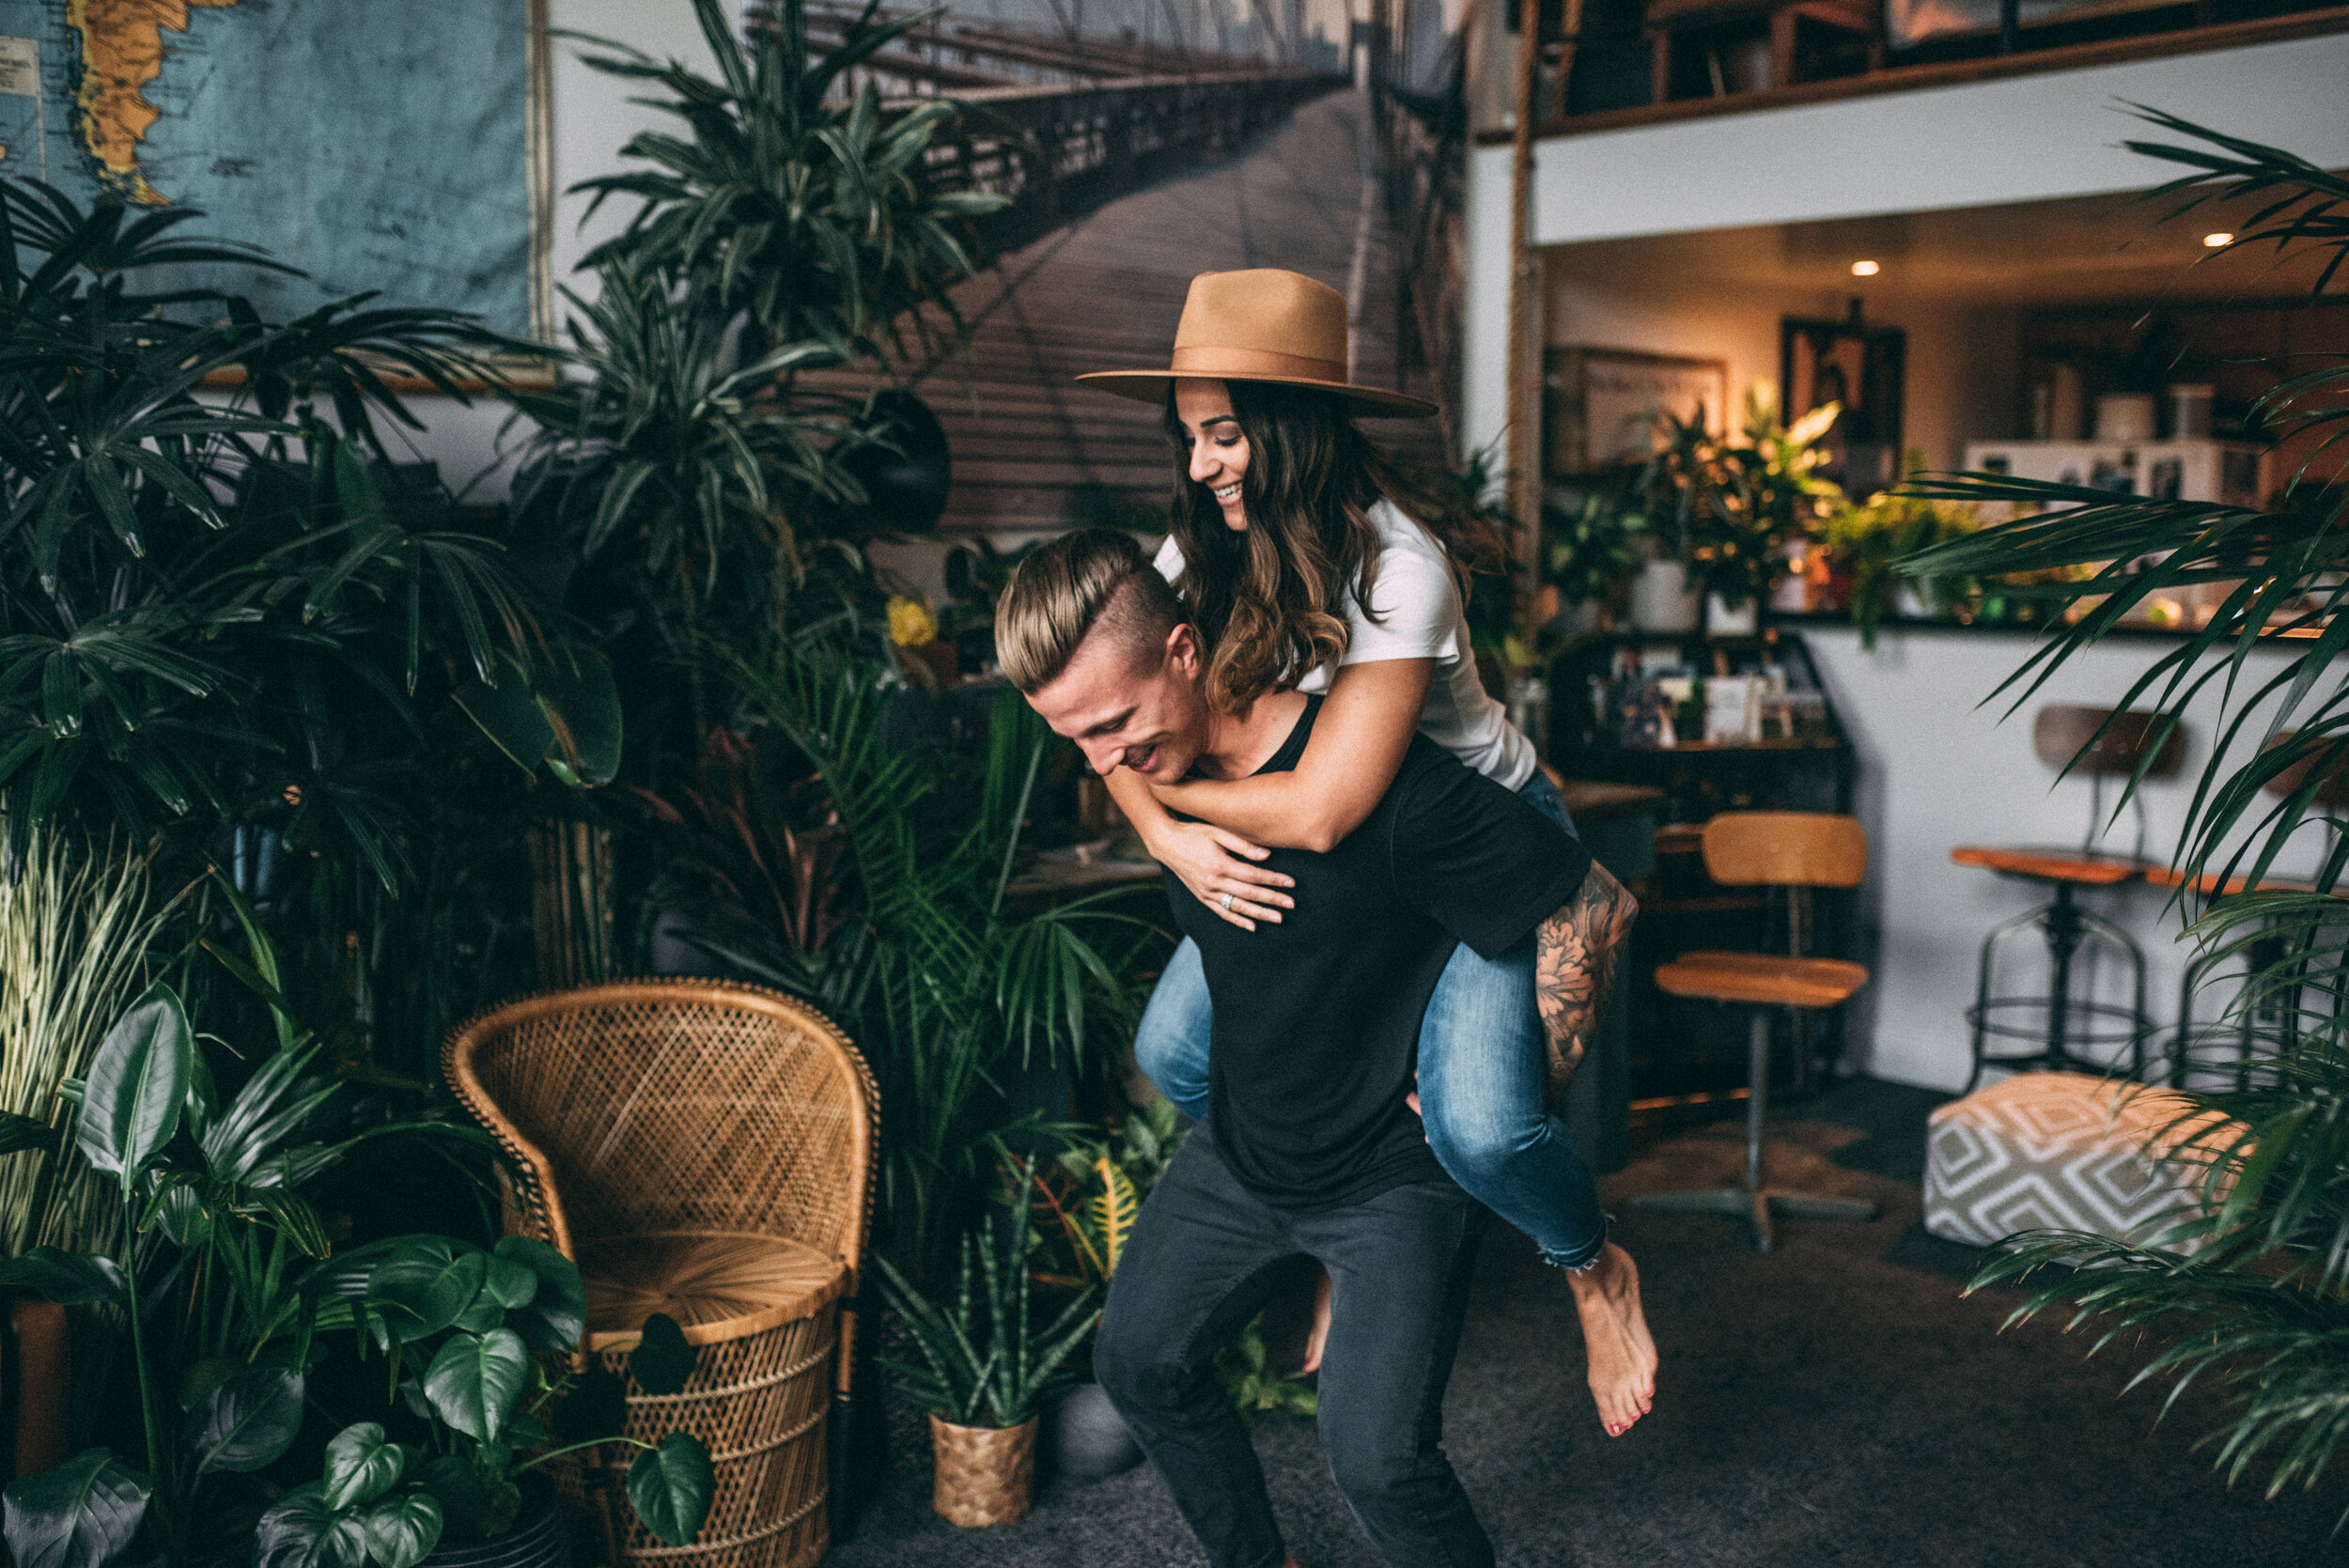 Vancouver Engagement Session - In Home Couples Session - Loft Garden Oasis - Laura Olson Photography - Sunshine Coast BC & Vancouver Wedding & Elopement Photographer7965.jpg